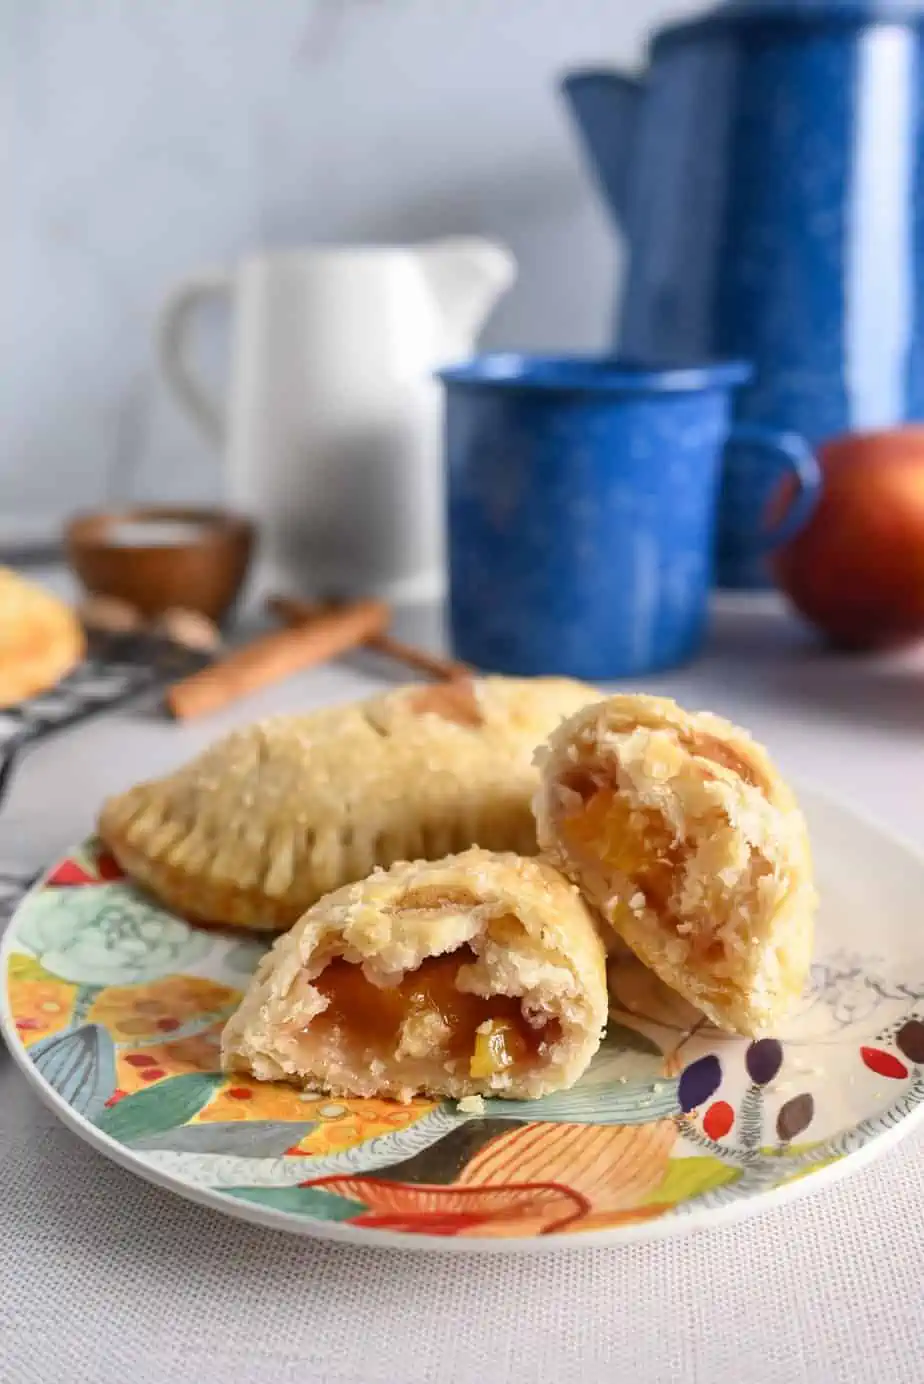 Two peach hand pies on a colorful plate. One of the pies is cut in half to show the peach filling. A coffee pot and coffee mug can be seen in the background.